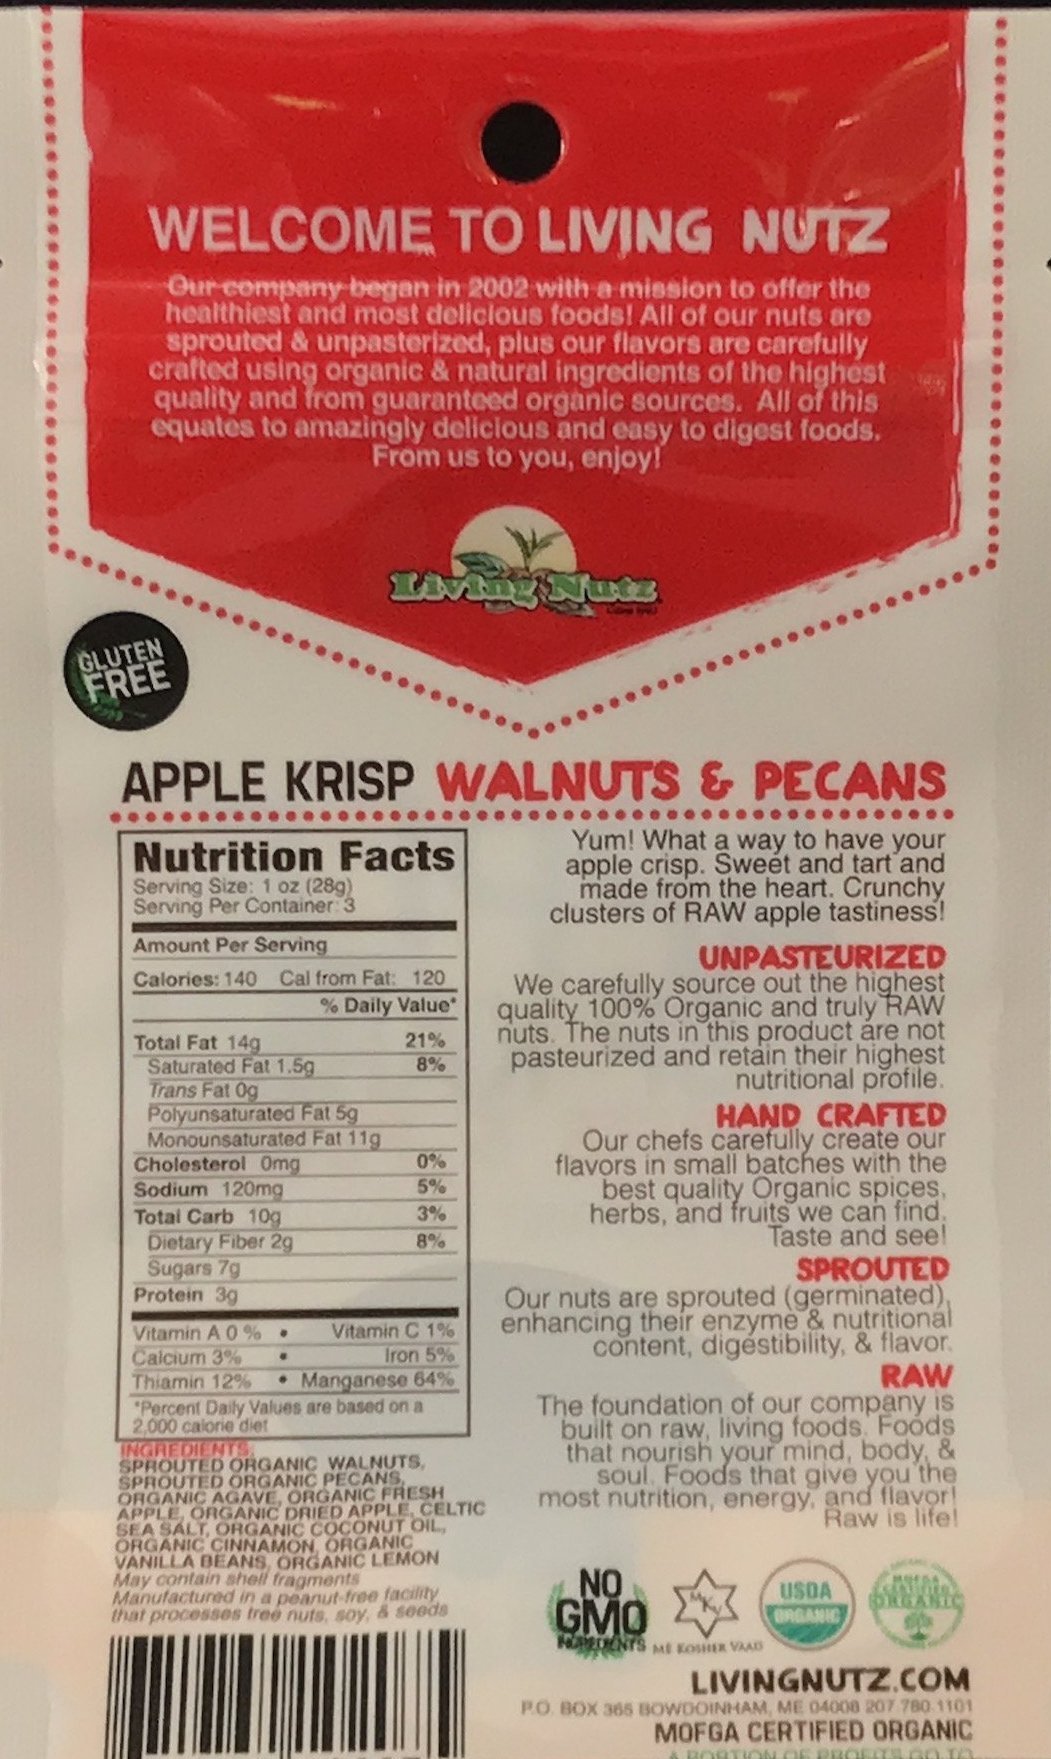 Organic raw sprouted nuts. Sprouted flavored raw walnuts with apple and spices. Organic snack